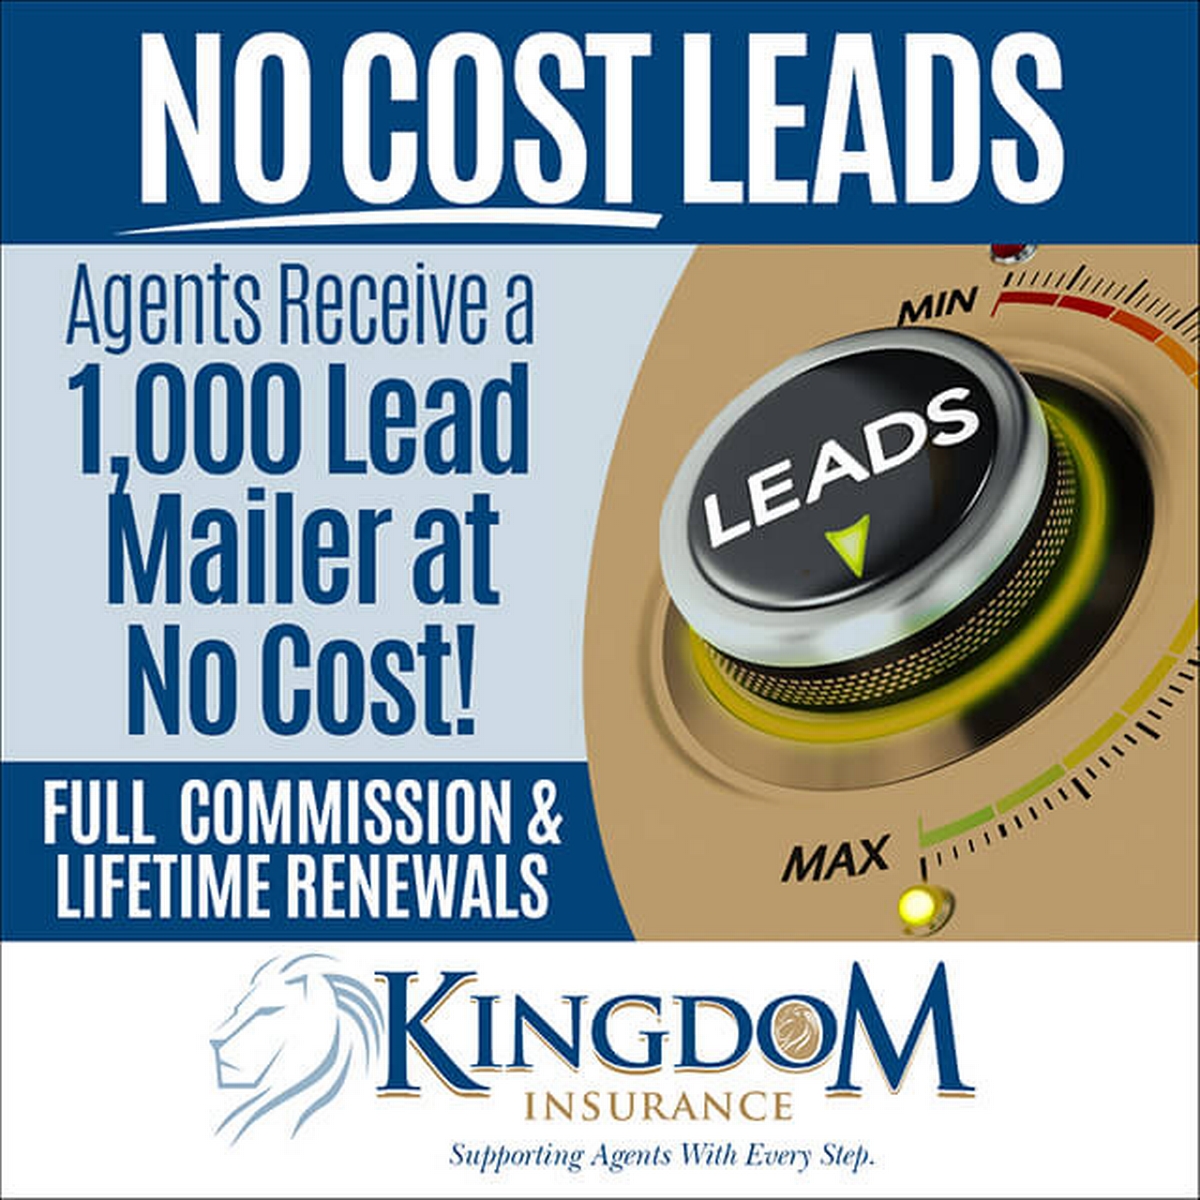 No Cost Leads - Agents receive a 1000 lead mailer at no cost!